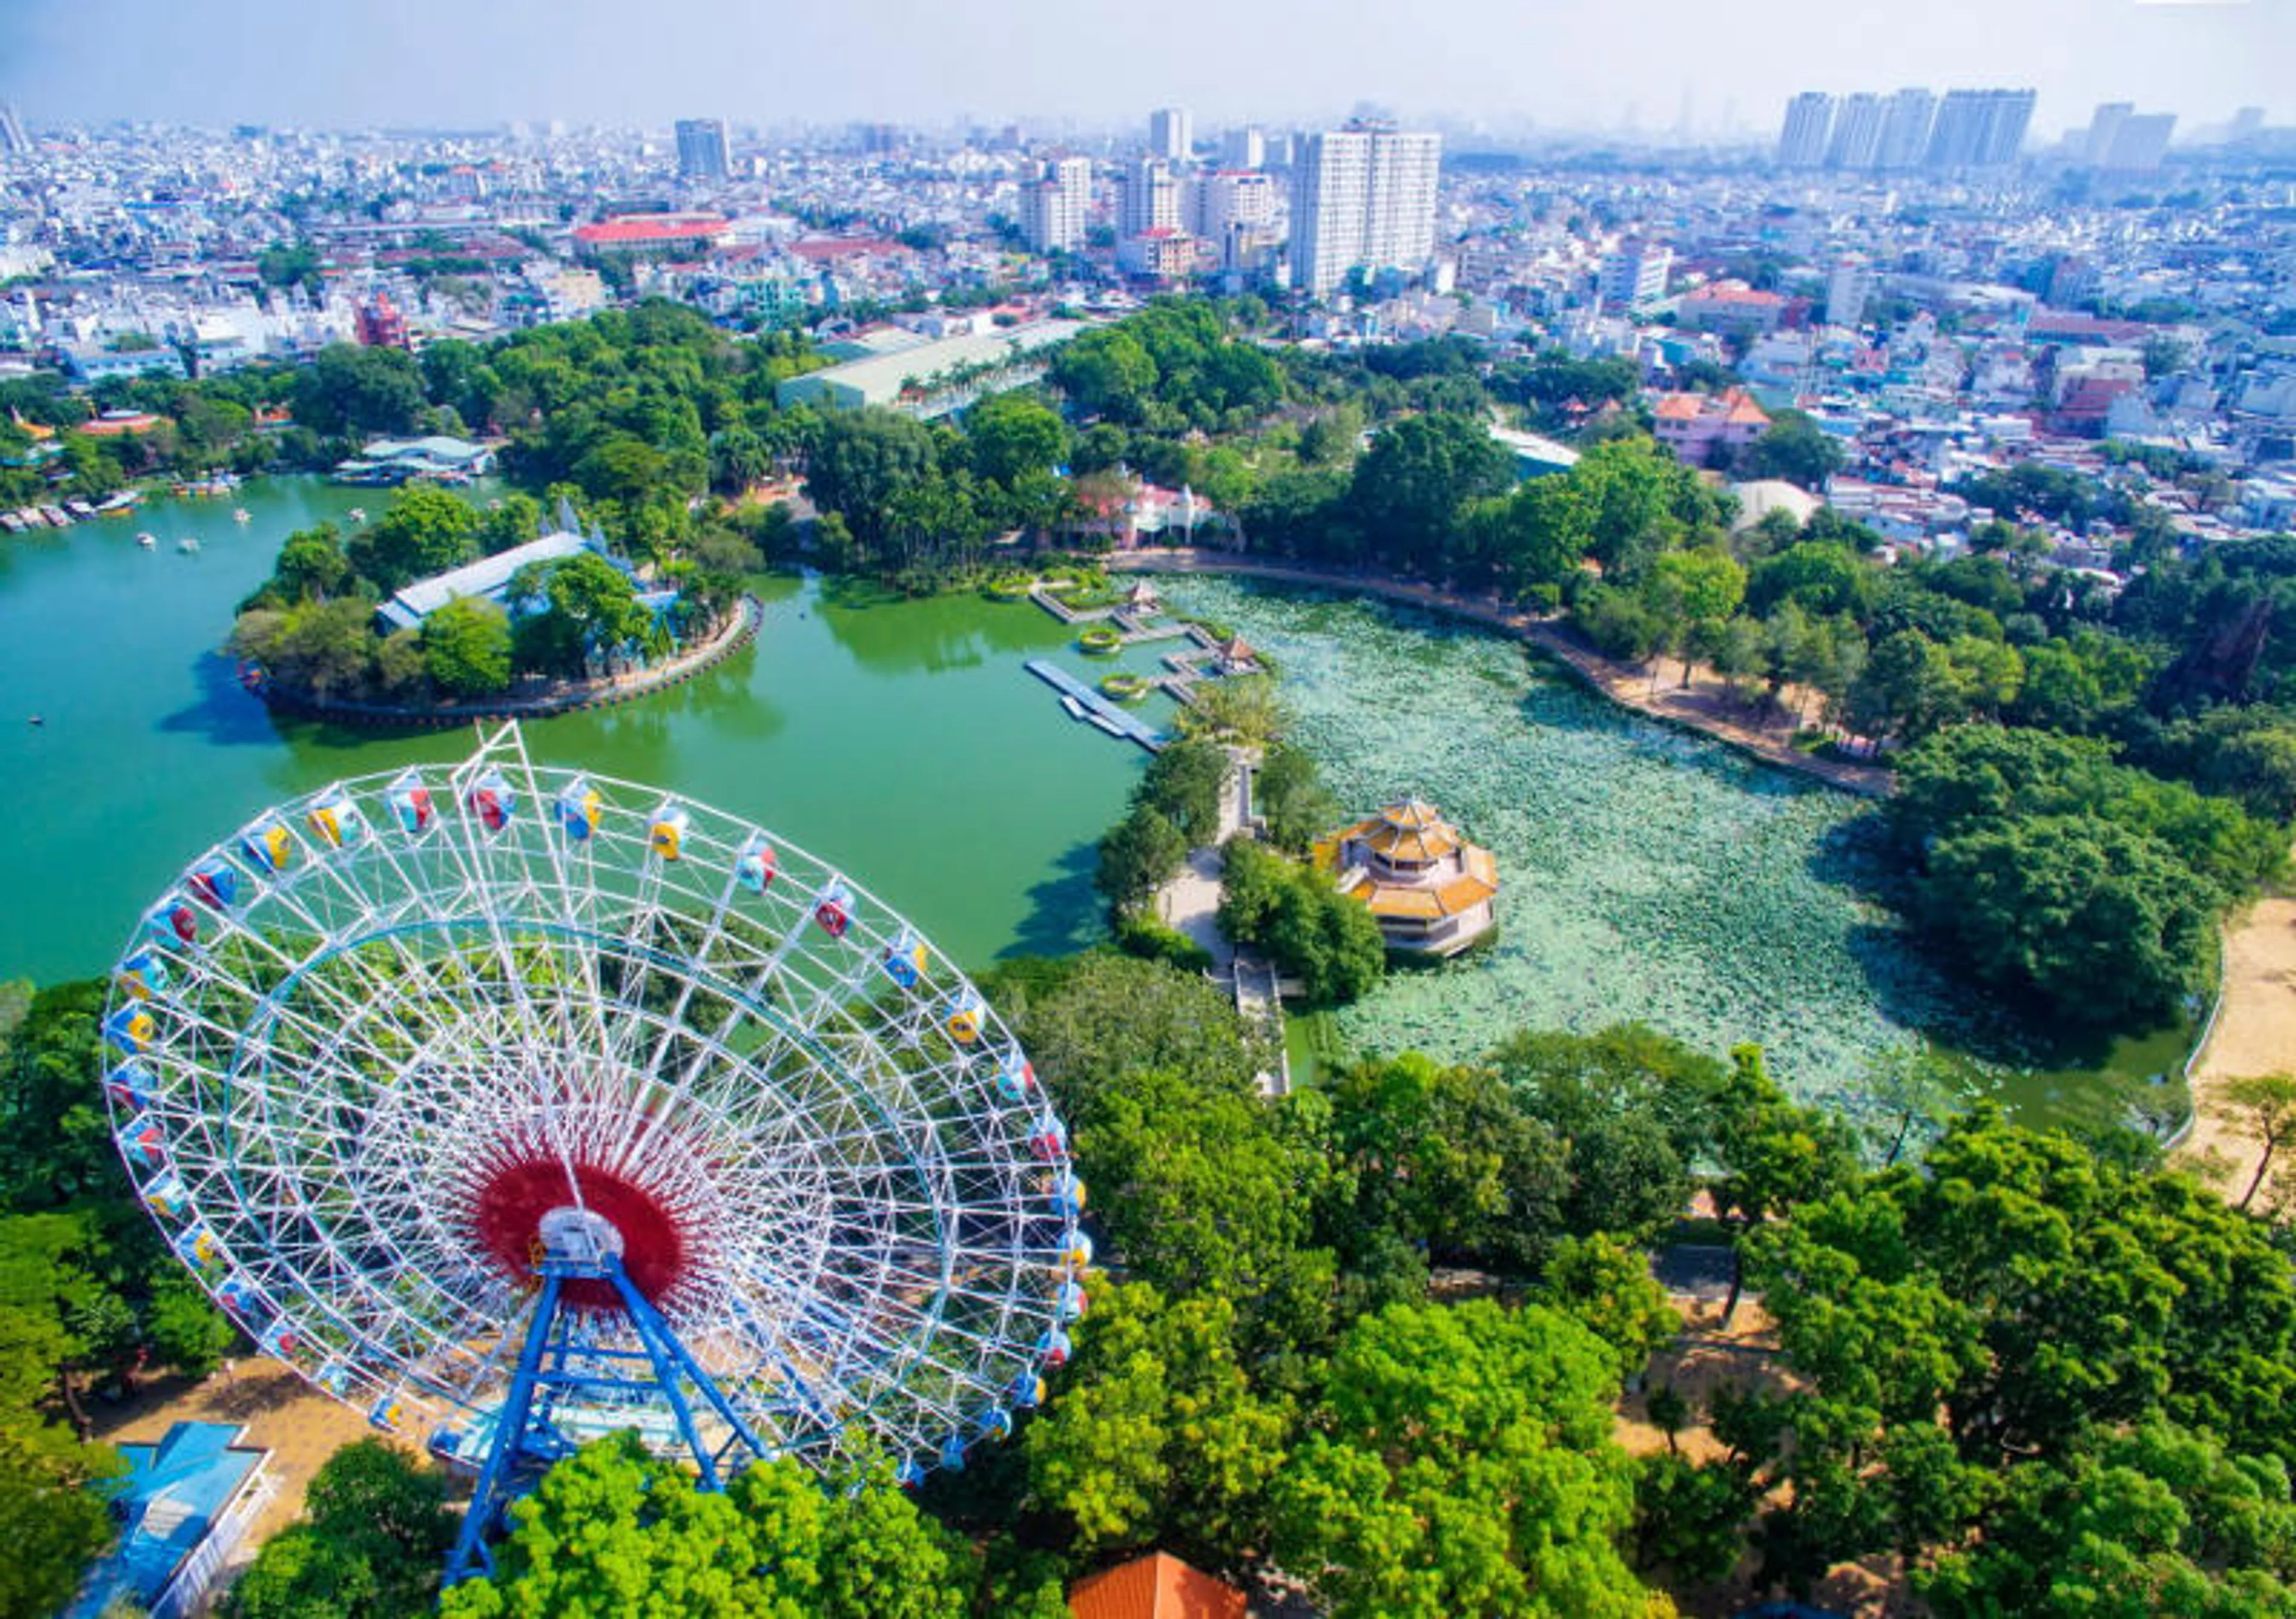 Dam Sen Kho - An entertainment destination not to be missed when coming to Saigon